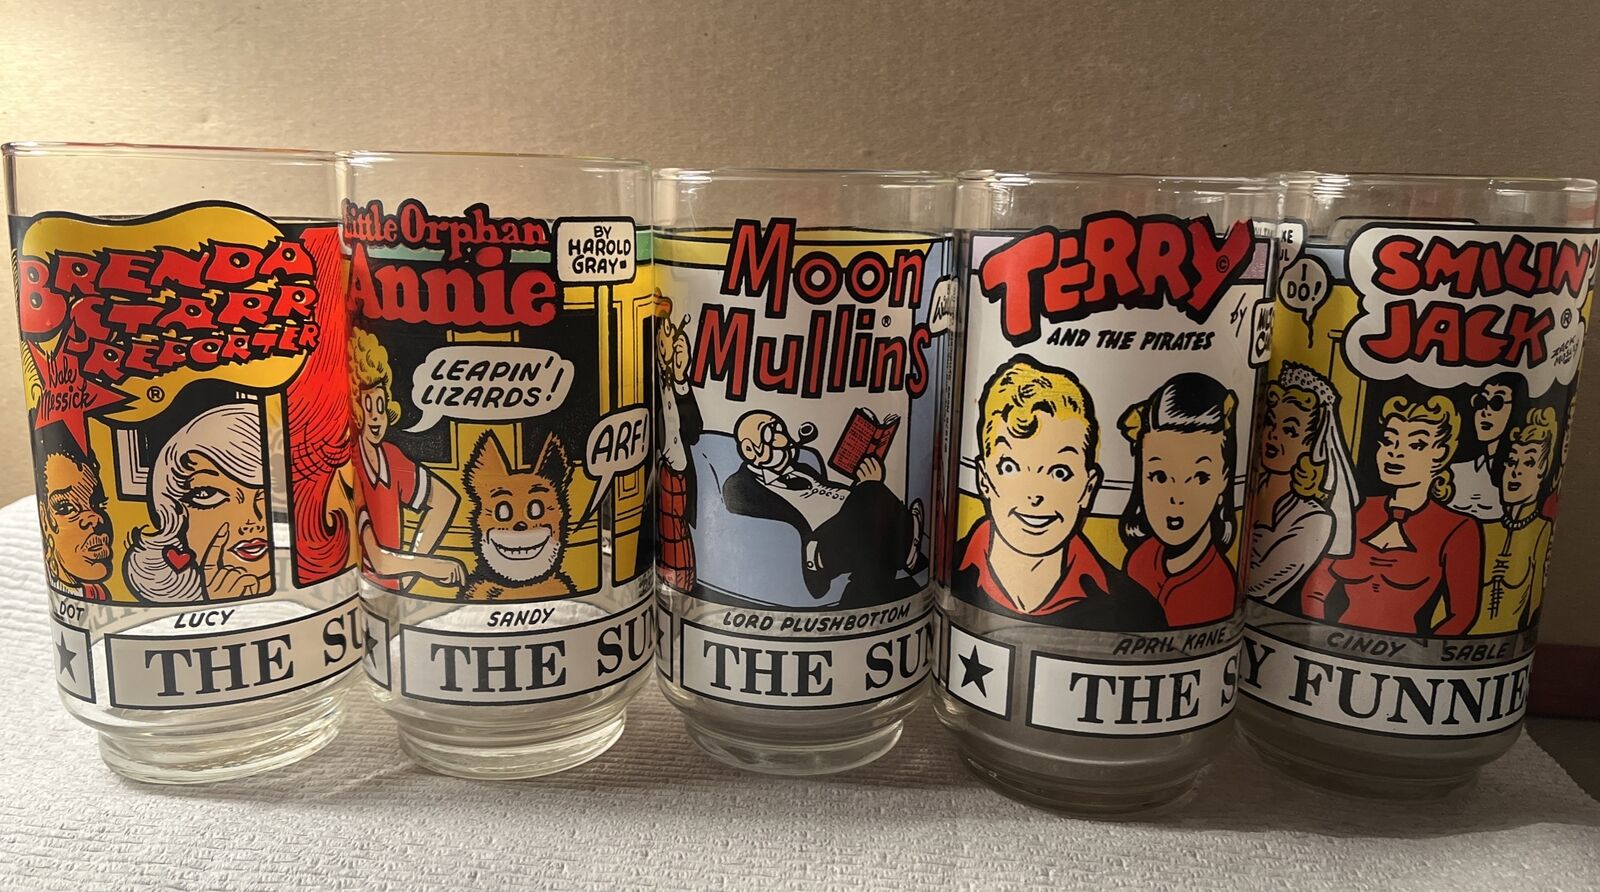 The Sunday Funnies drinking glasses 1976